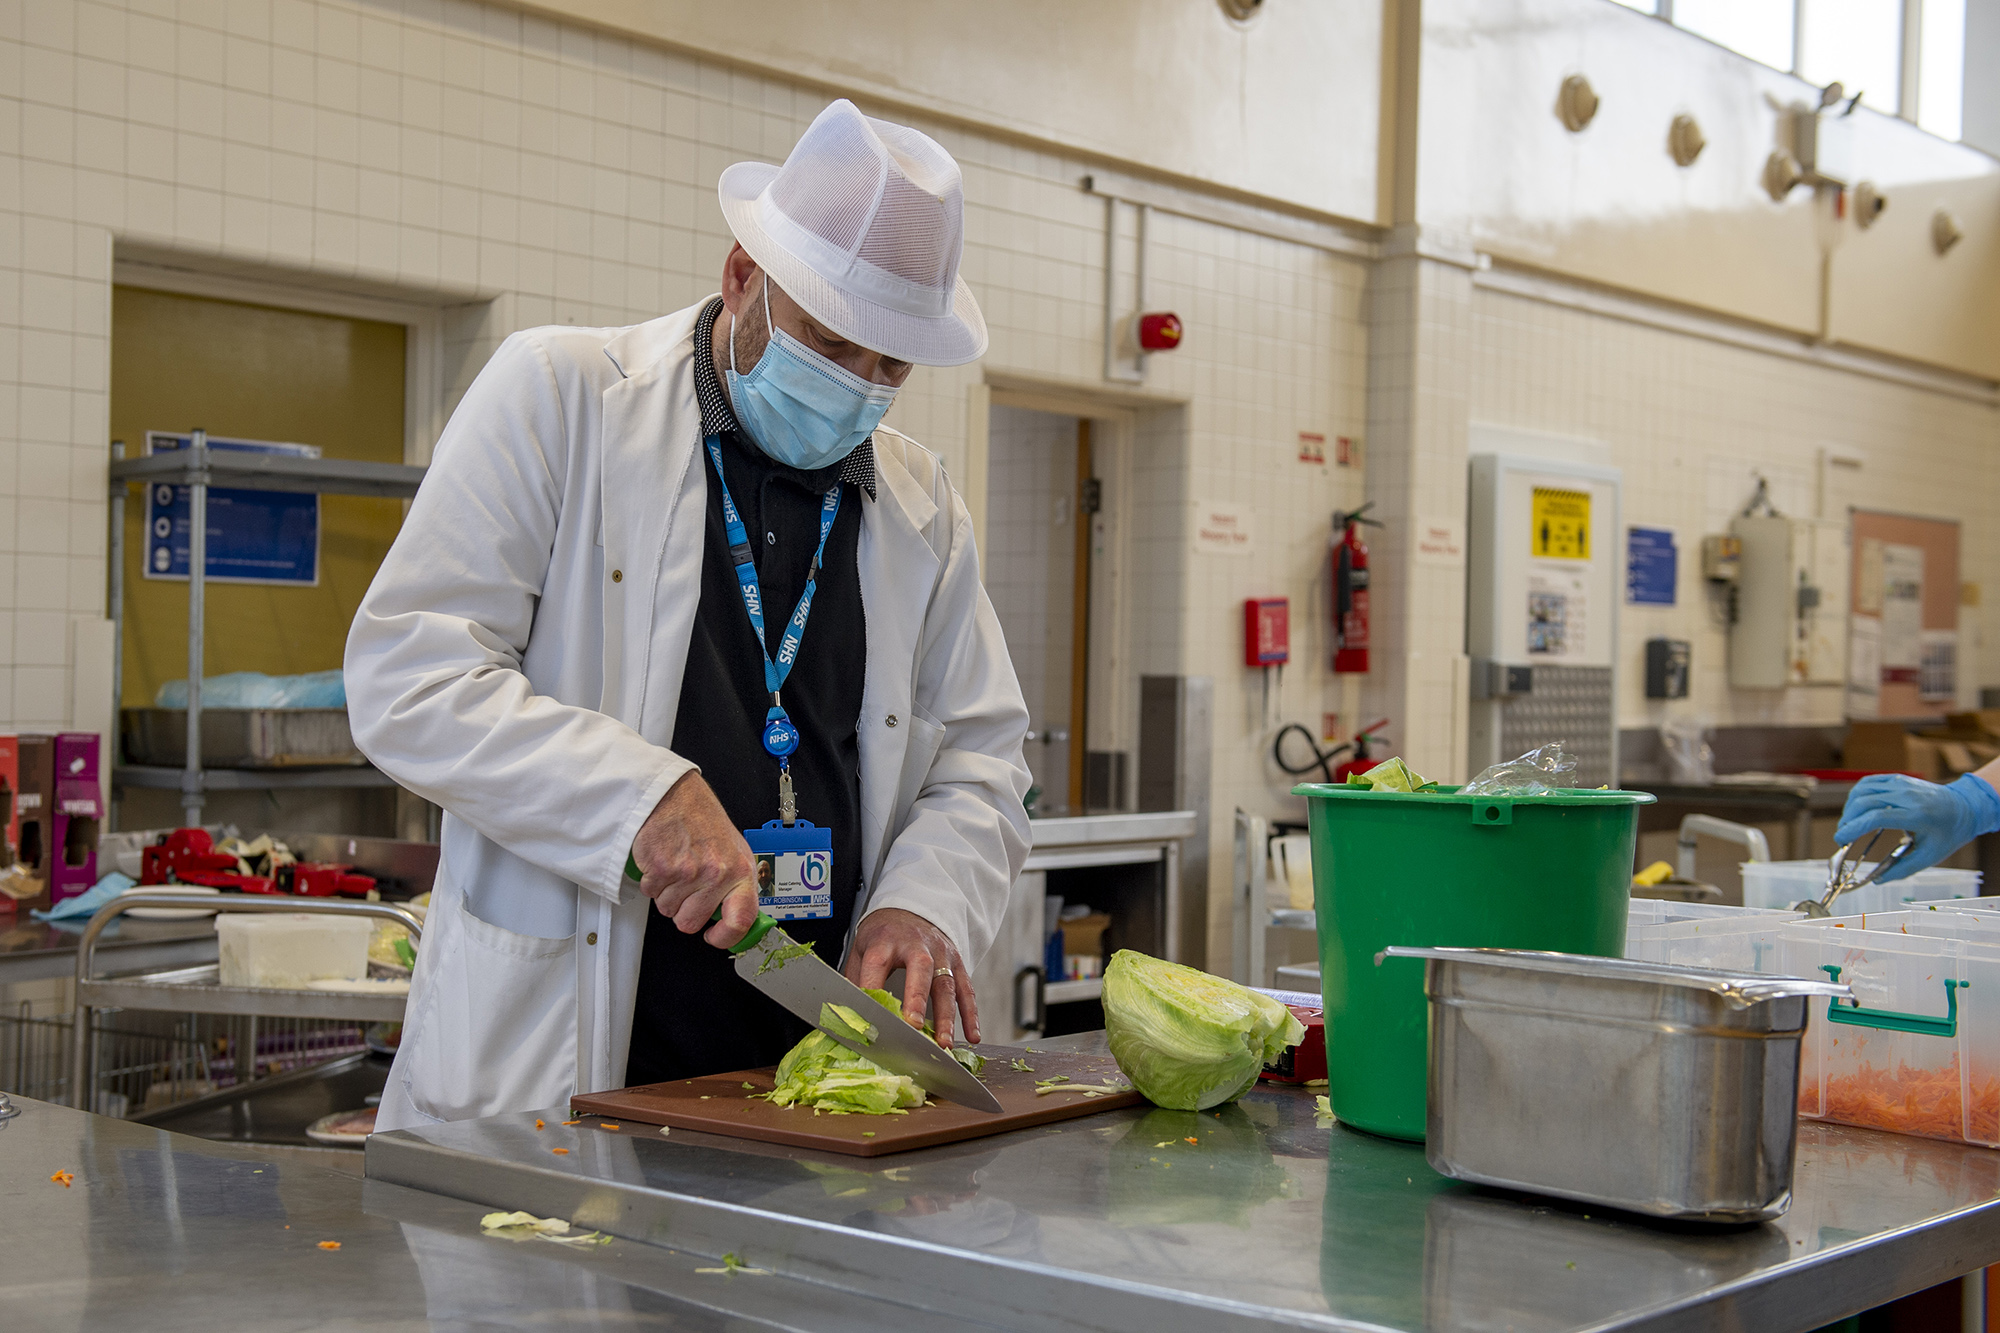 Male staff member preparing food in the kitchen wearing PPE.